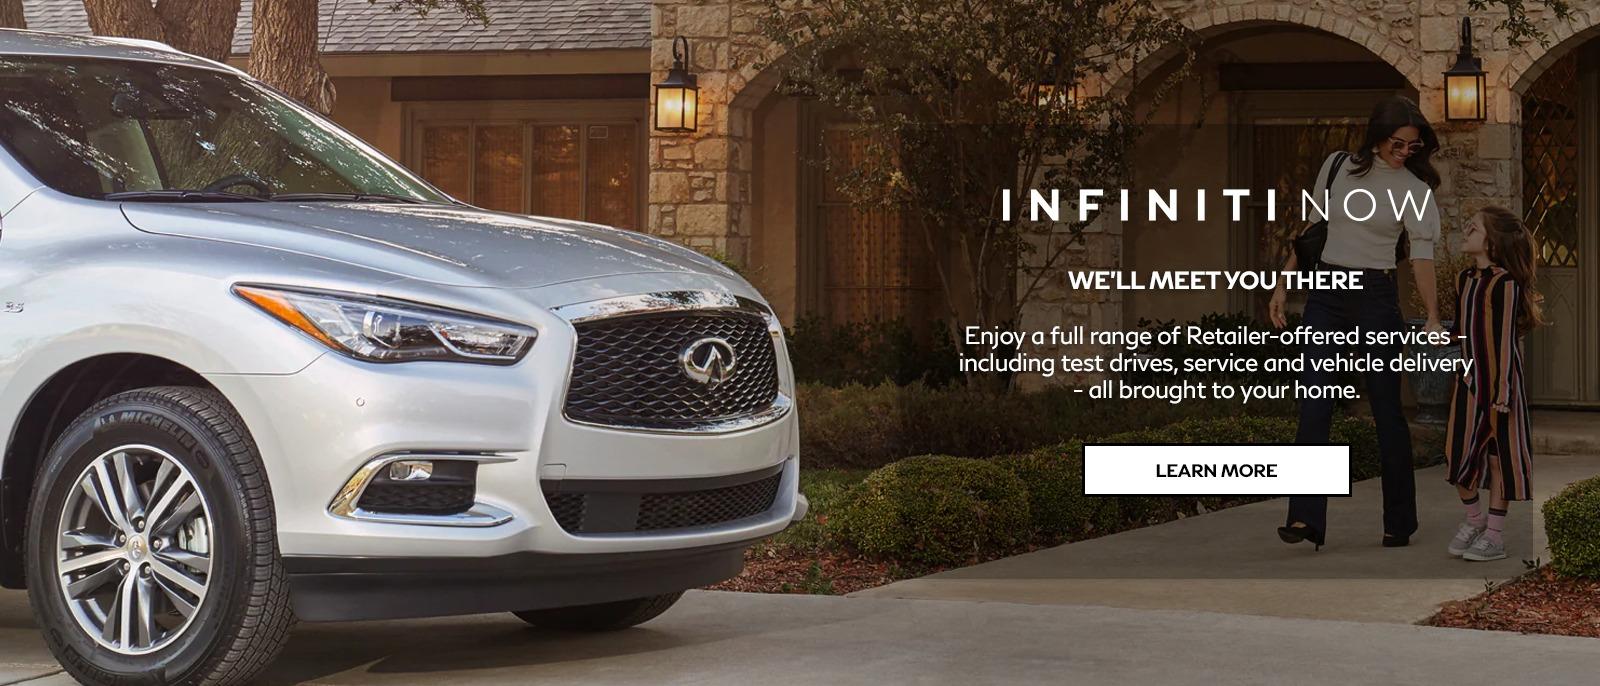 INFINITI Now - We'll Meet You There